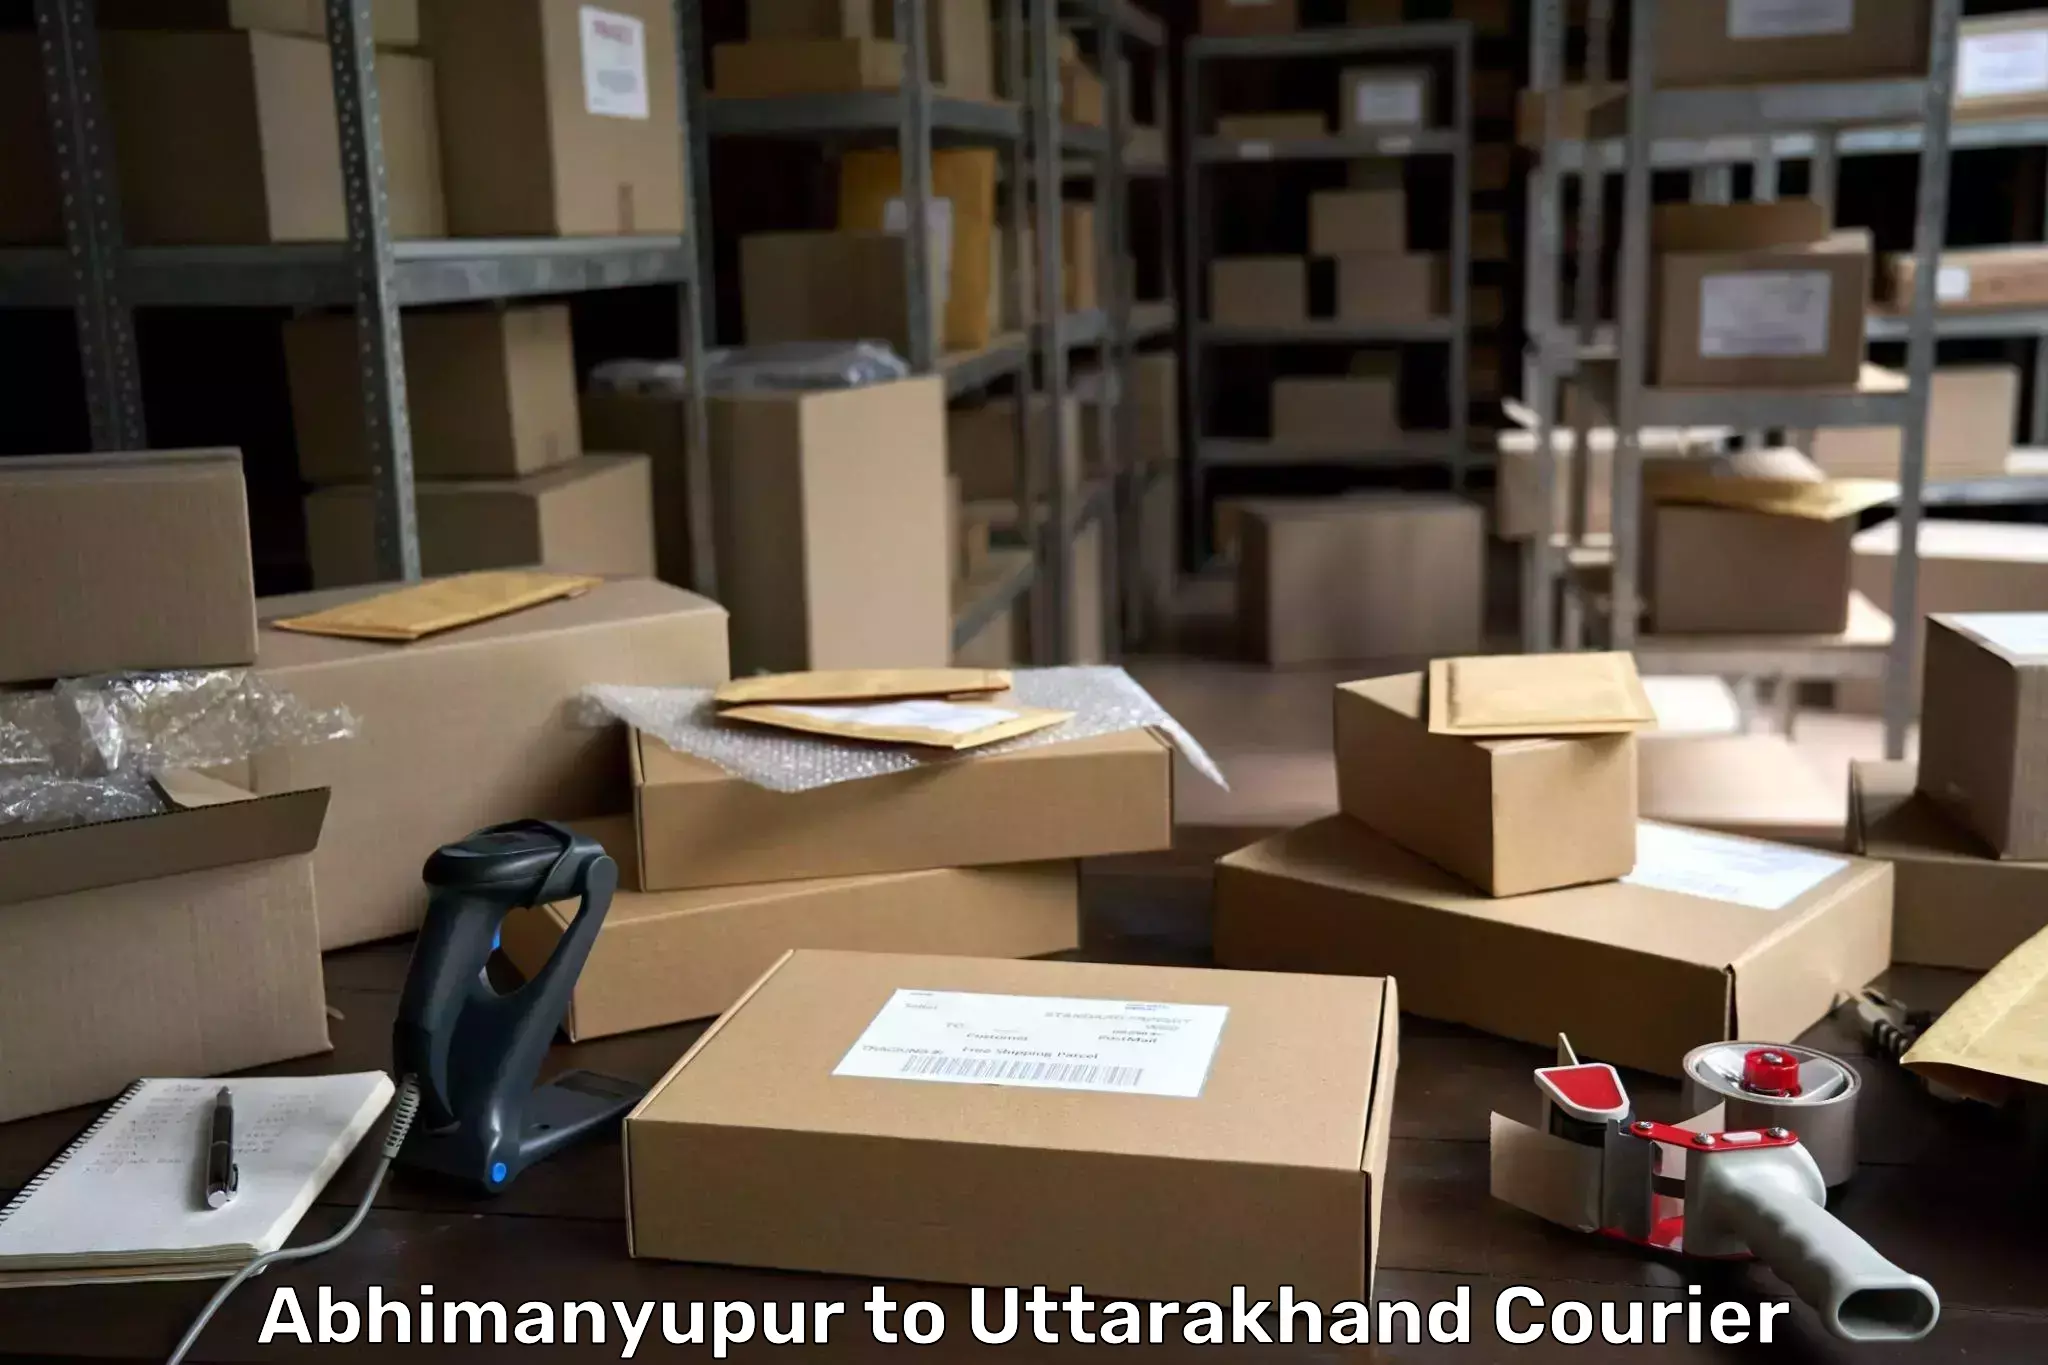 Large-scale shipping solutions Abhimanyupur to Sitarganj